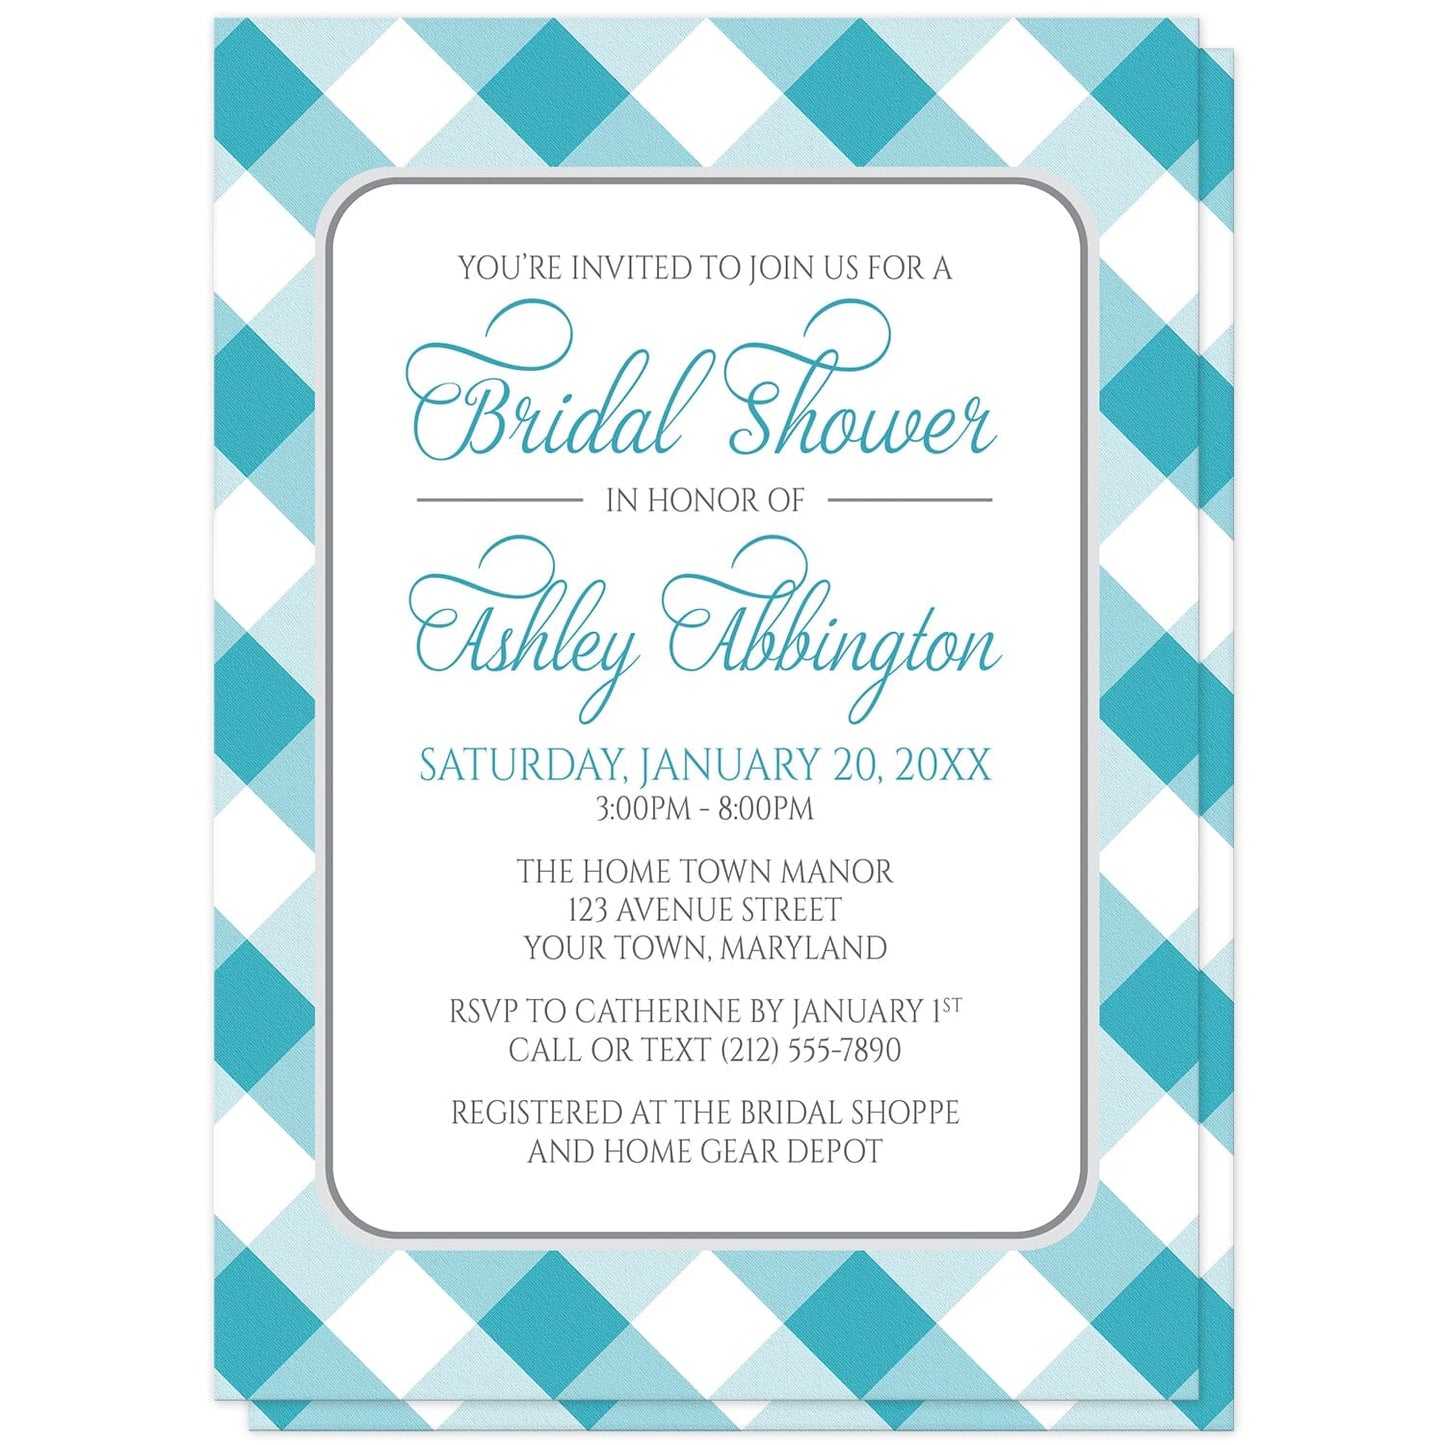 Turquoise Gingham Bridal Shower Invitations at Artistically Invited. Turquoise gingham bridal shower invitations with your personalized bridal shower celebration details custom printed in turquoise and gray inside a white rectangular area outlined in gray. The background design is a diagonal turquoise and white gingham pattern which is also printed on the back side of the invitations. 